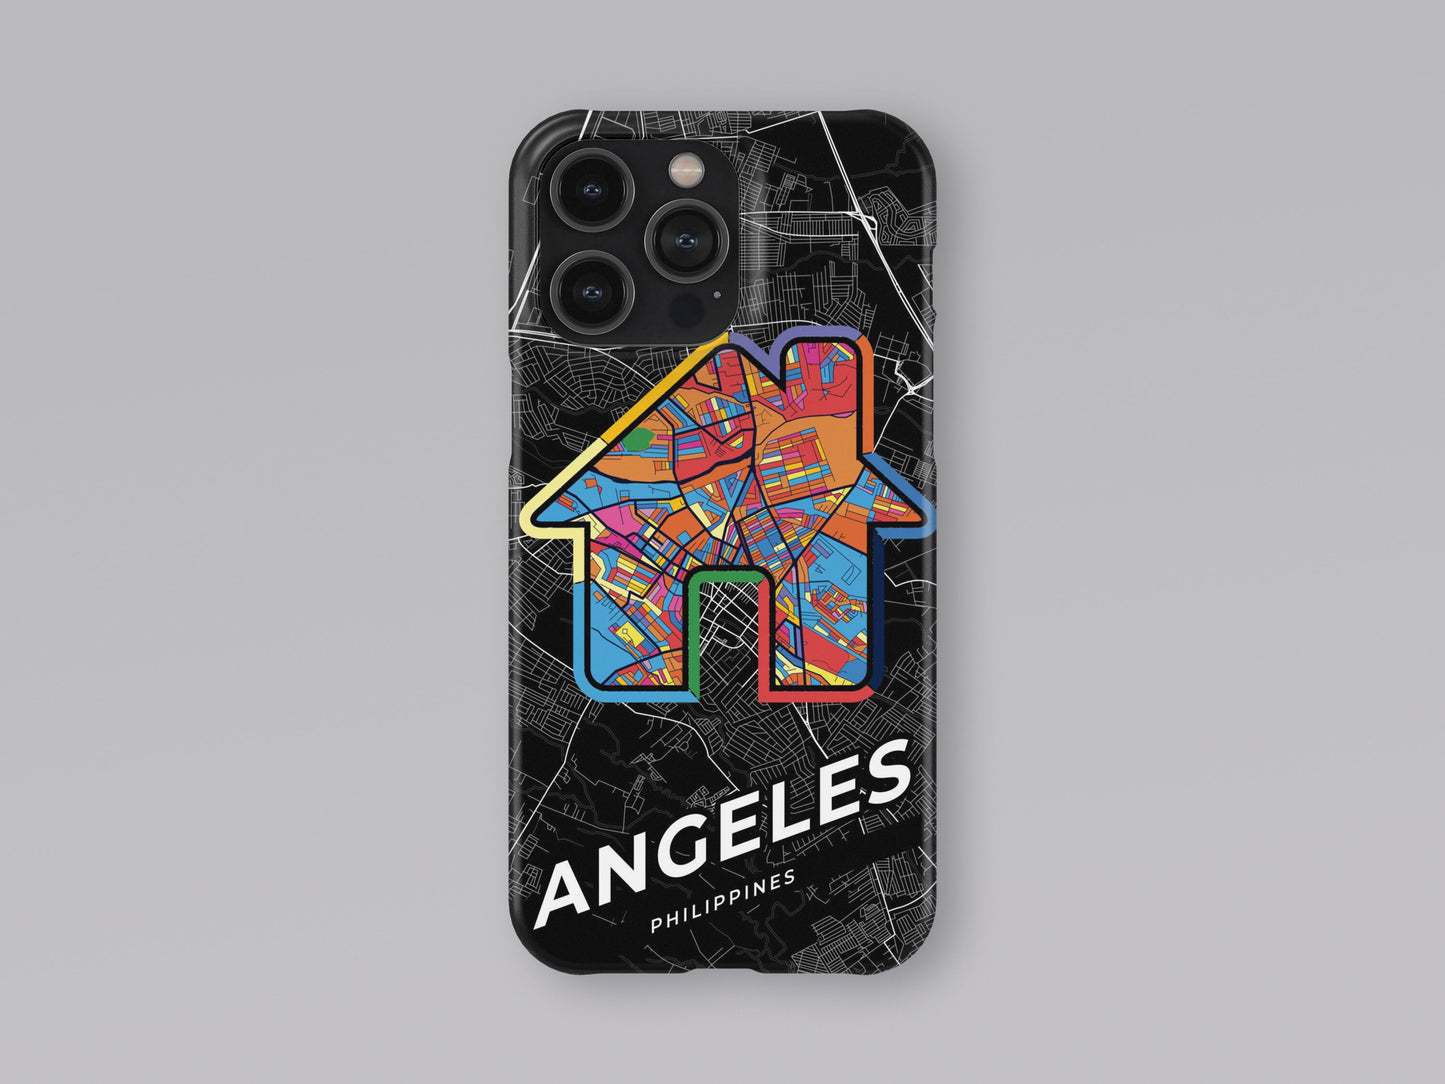 Angeles Philippines slim phone case with colorful icon. Birthday, wedding or housewarming gift. Couple match cases. 3